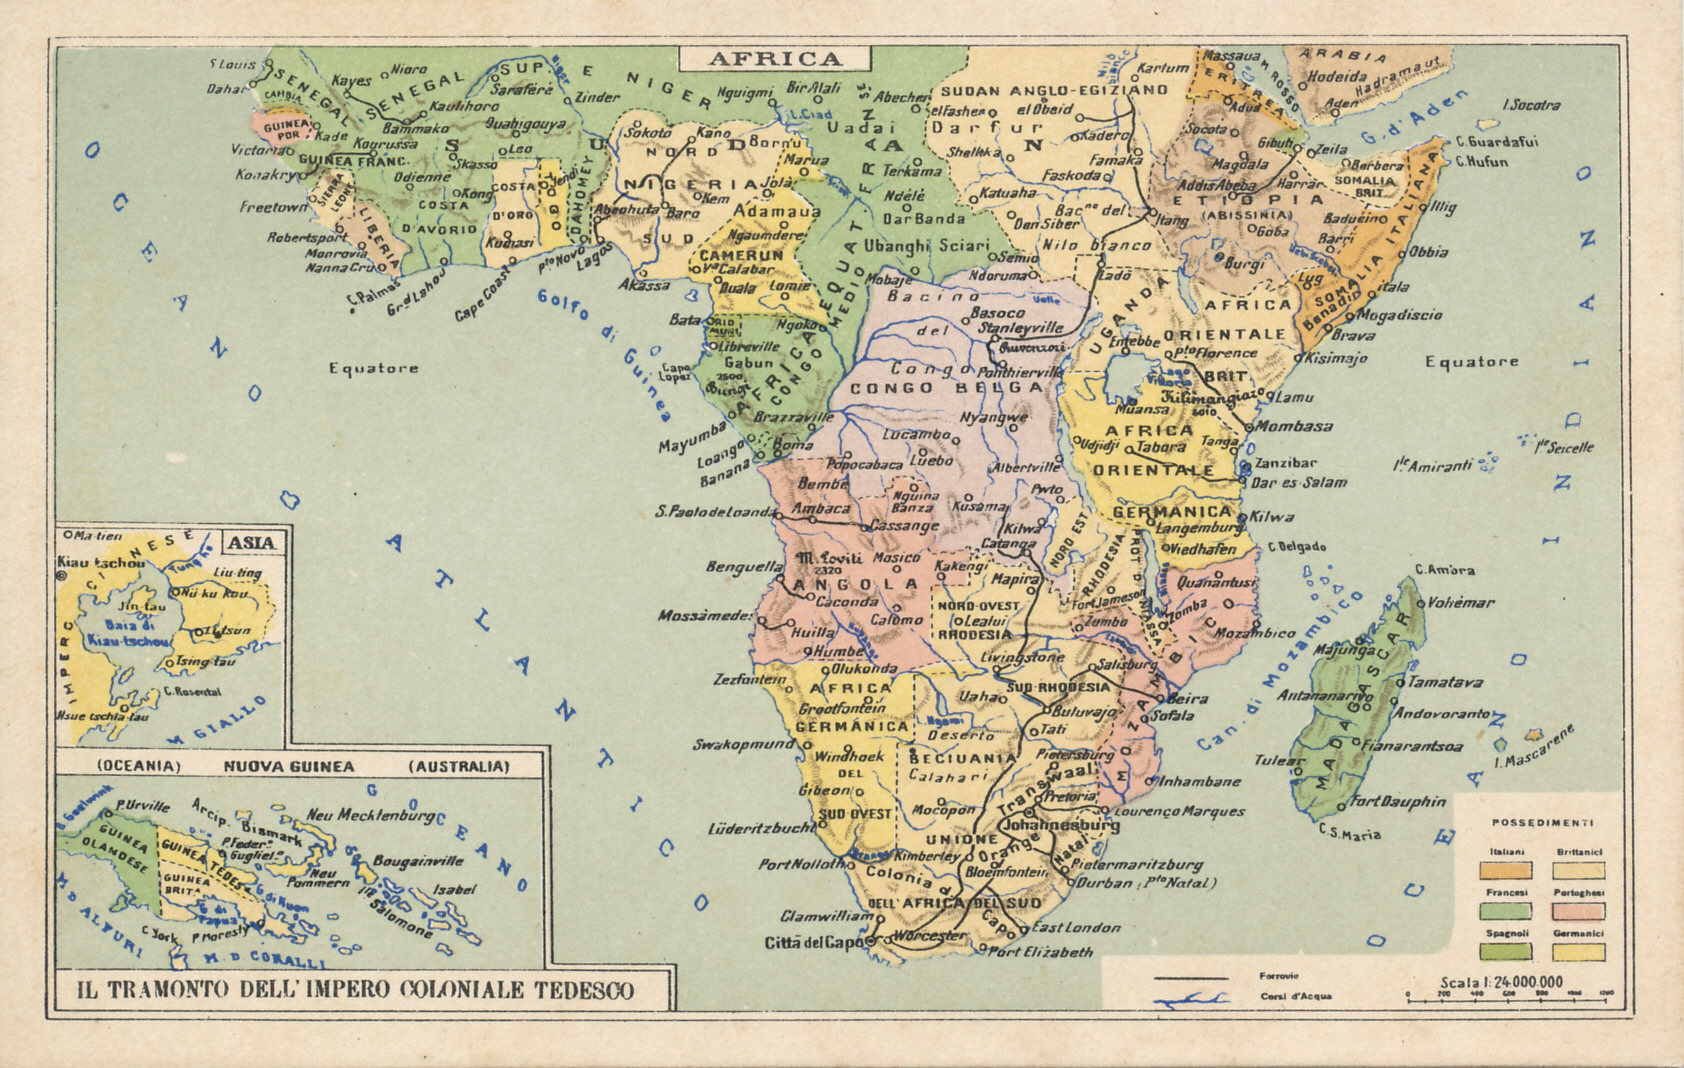 An Italian postcard map of central and southern Africa with insets for New Guinea and Kiautschau, China, with the colonies of Italy, Britain, France, Portugal, Spain, Germany, and Belgium.
Text:
Il tramonto dell'impero coloniale tedesco The sunset of the German colonial empire